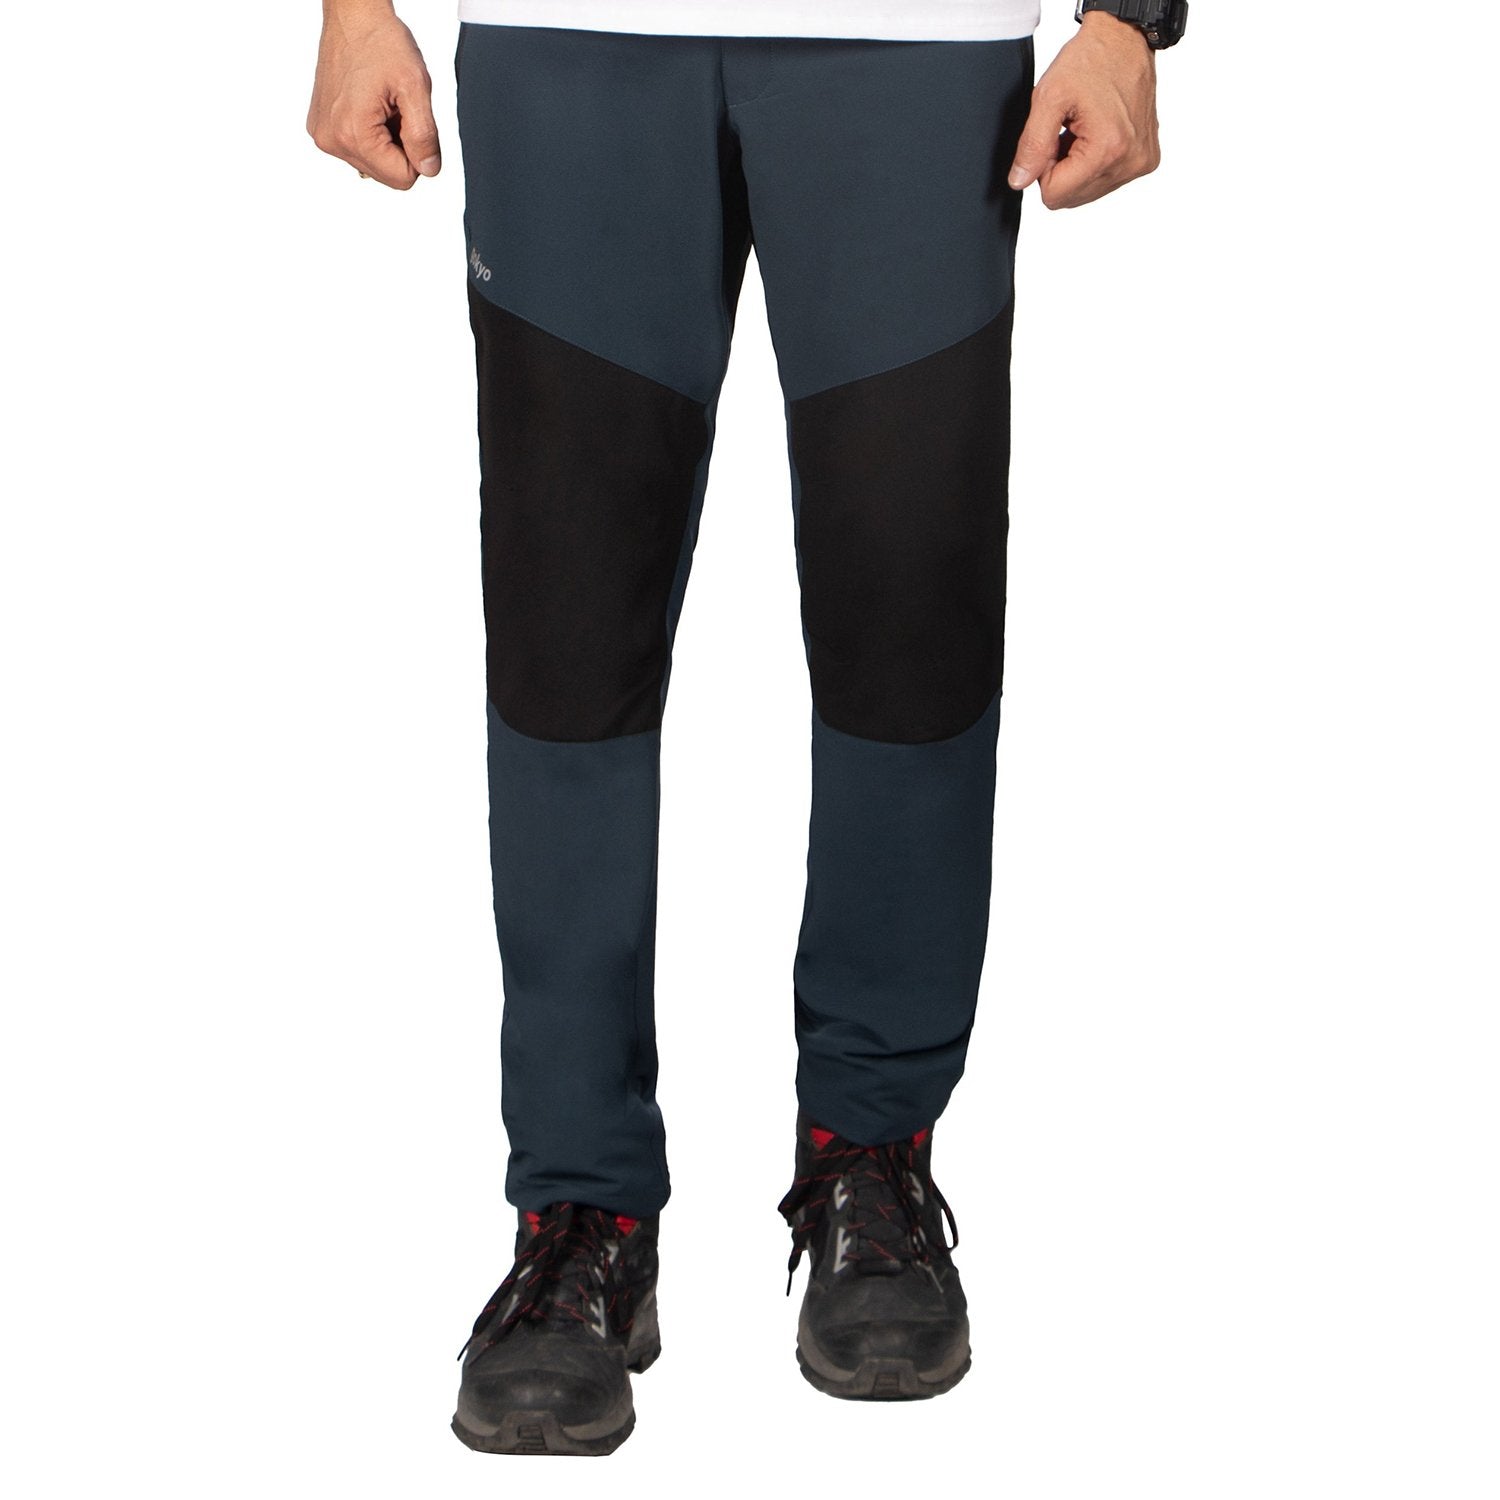 Buy Manali All Weather Trekking Pants Airforce Blue at Gokyo Outdoor Clothing & Gear